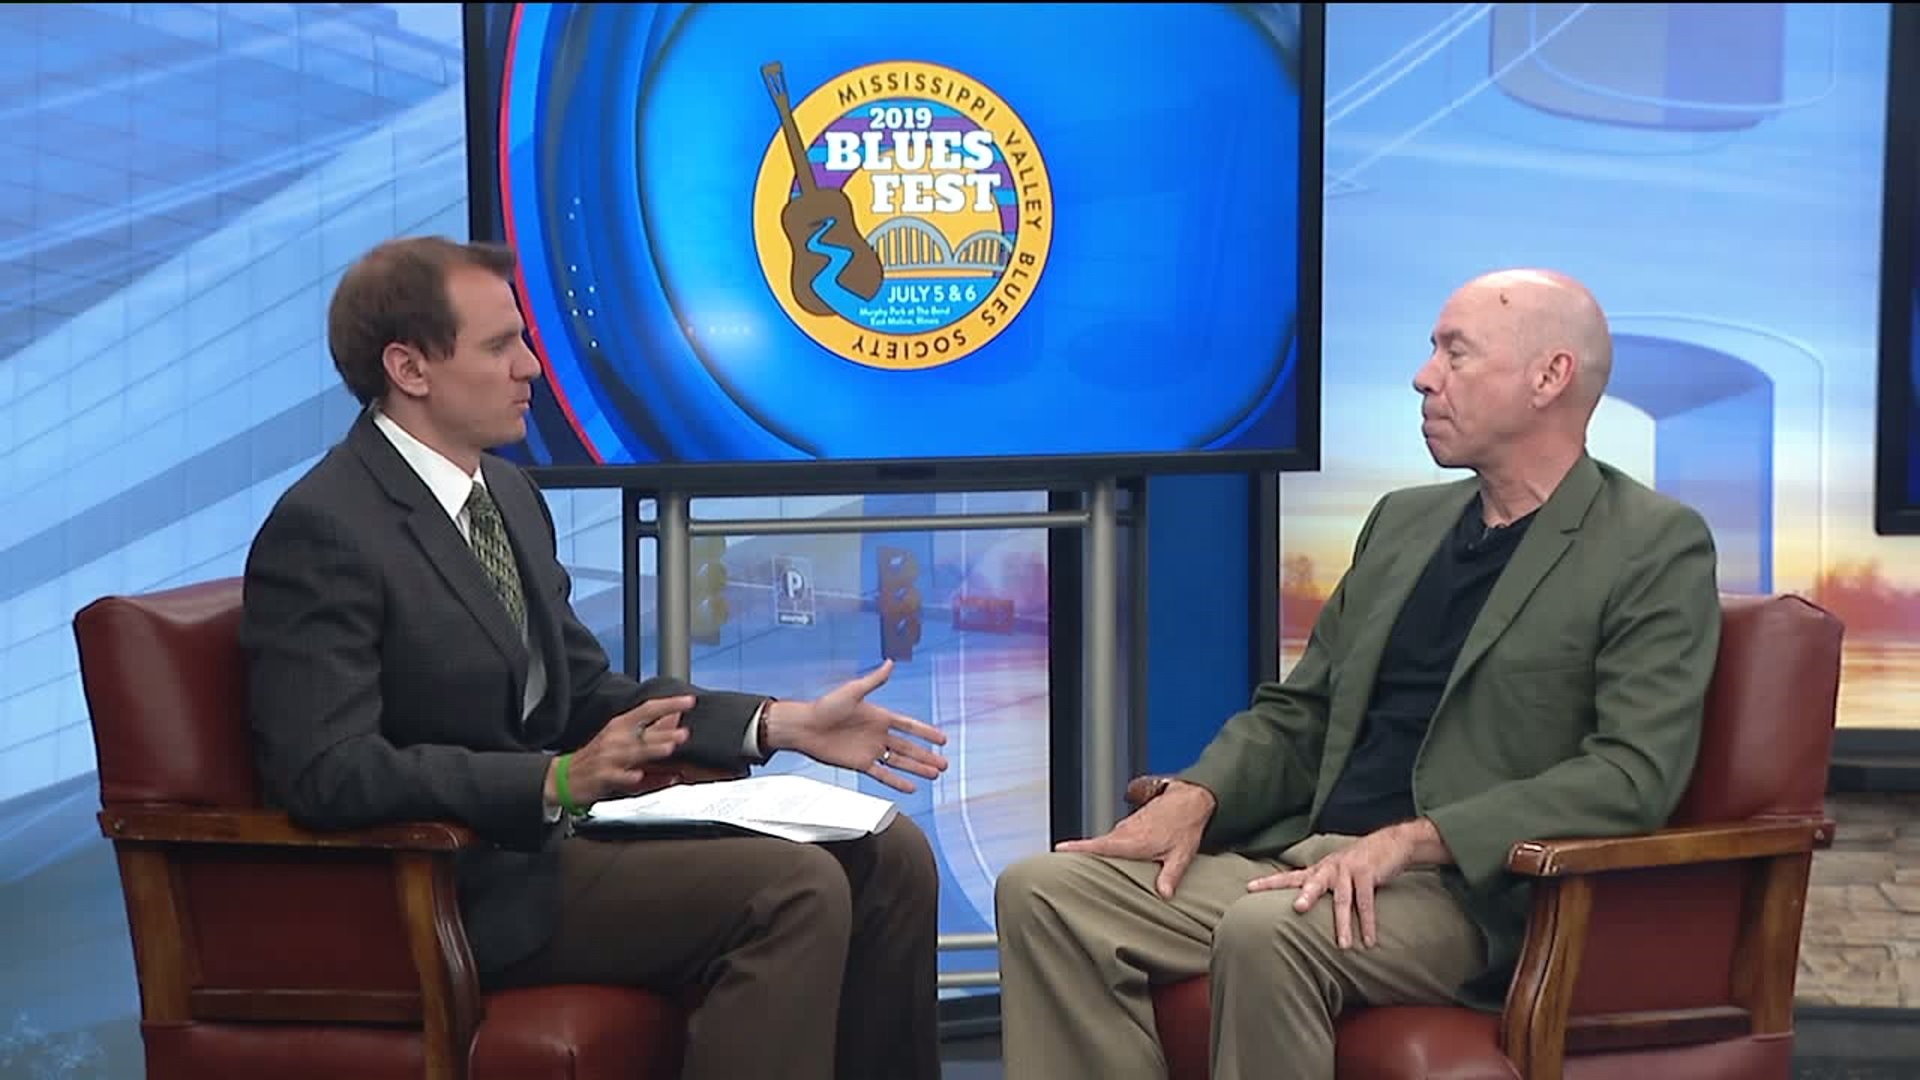 Mississippi Valley Blues Society President discusses upcoming event